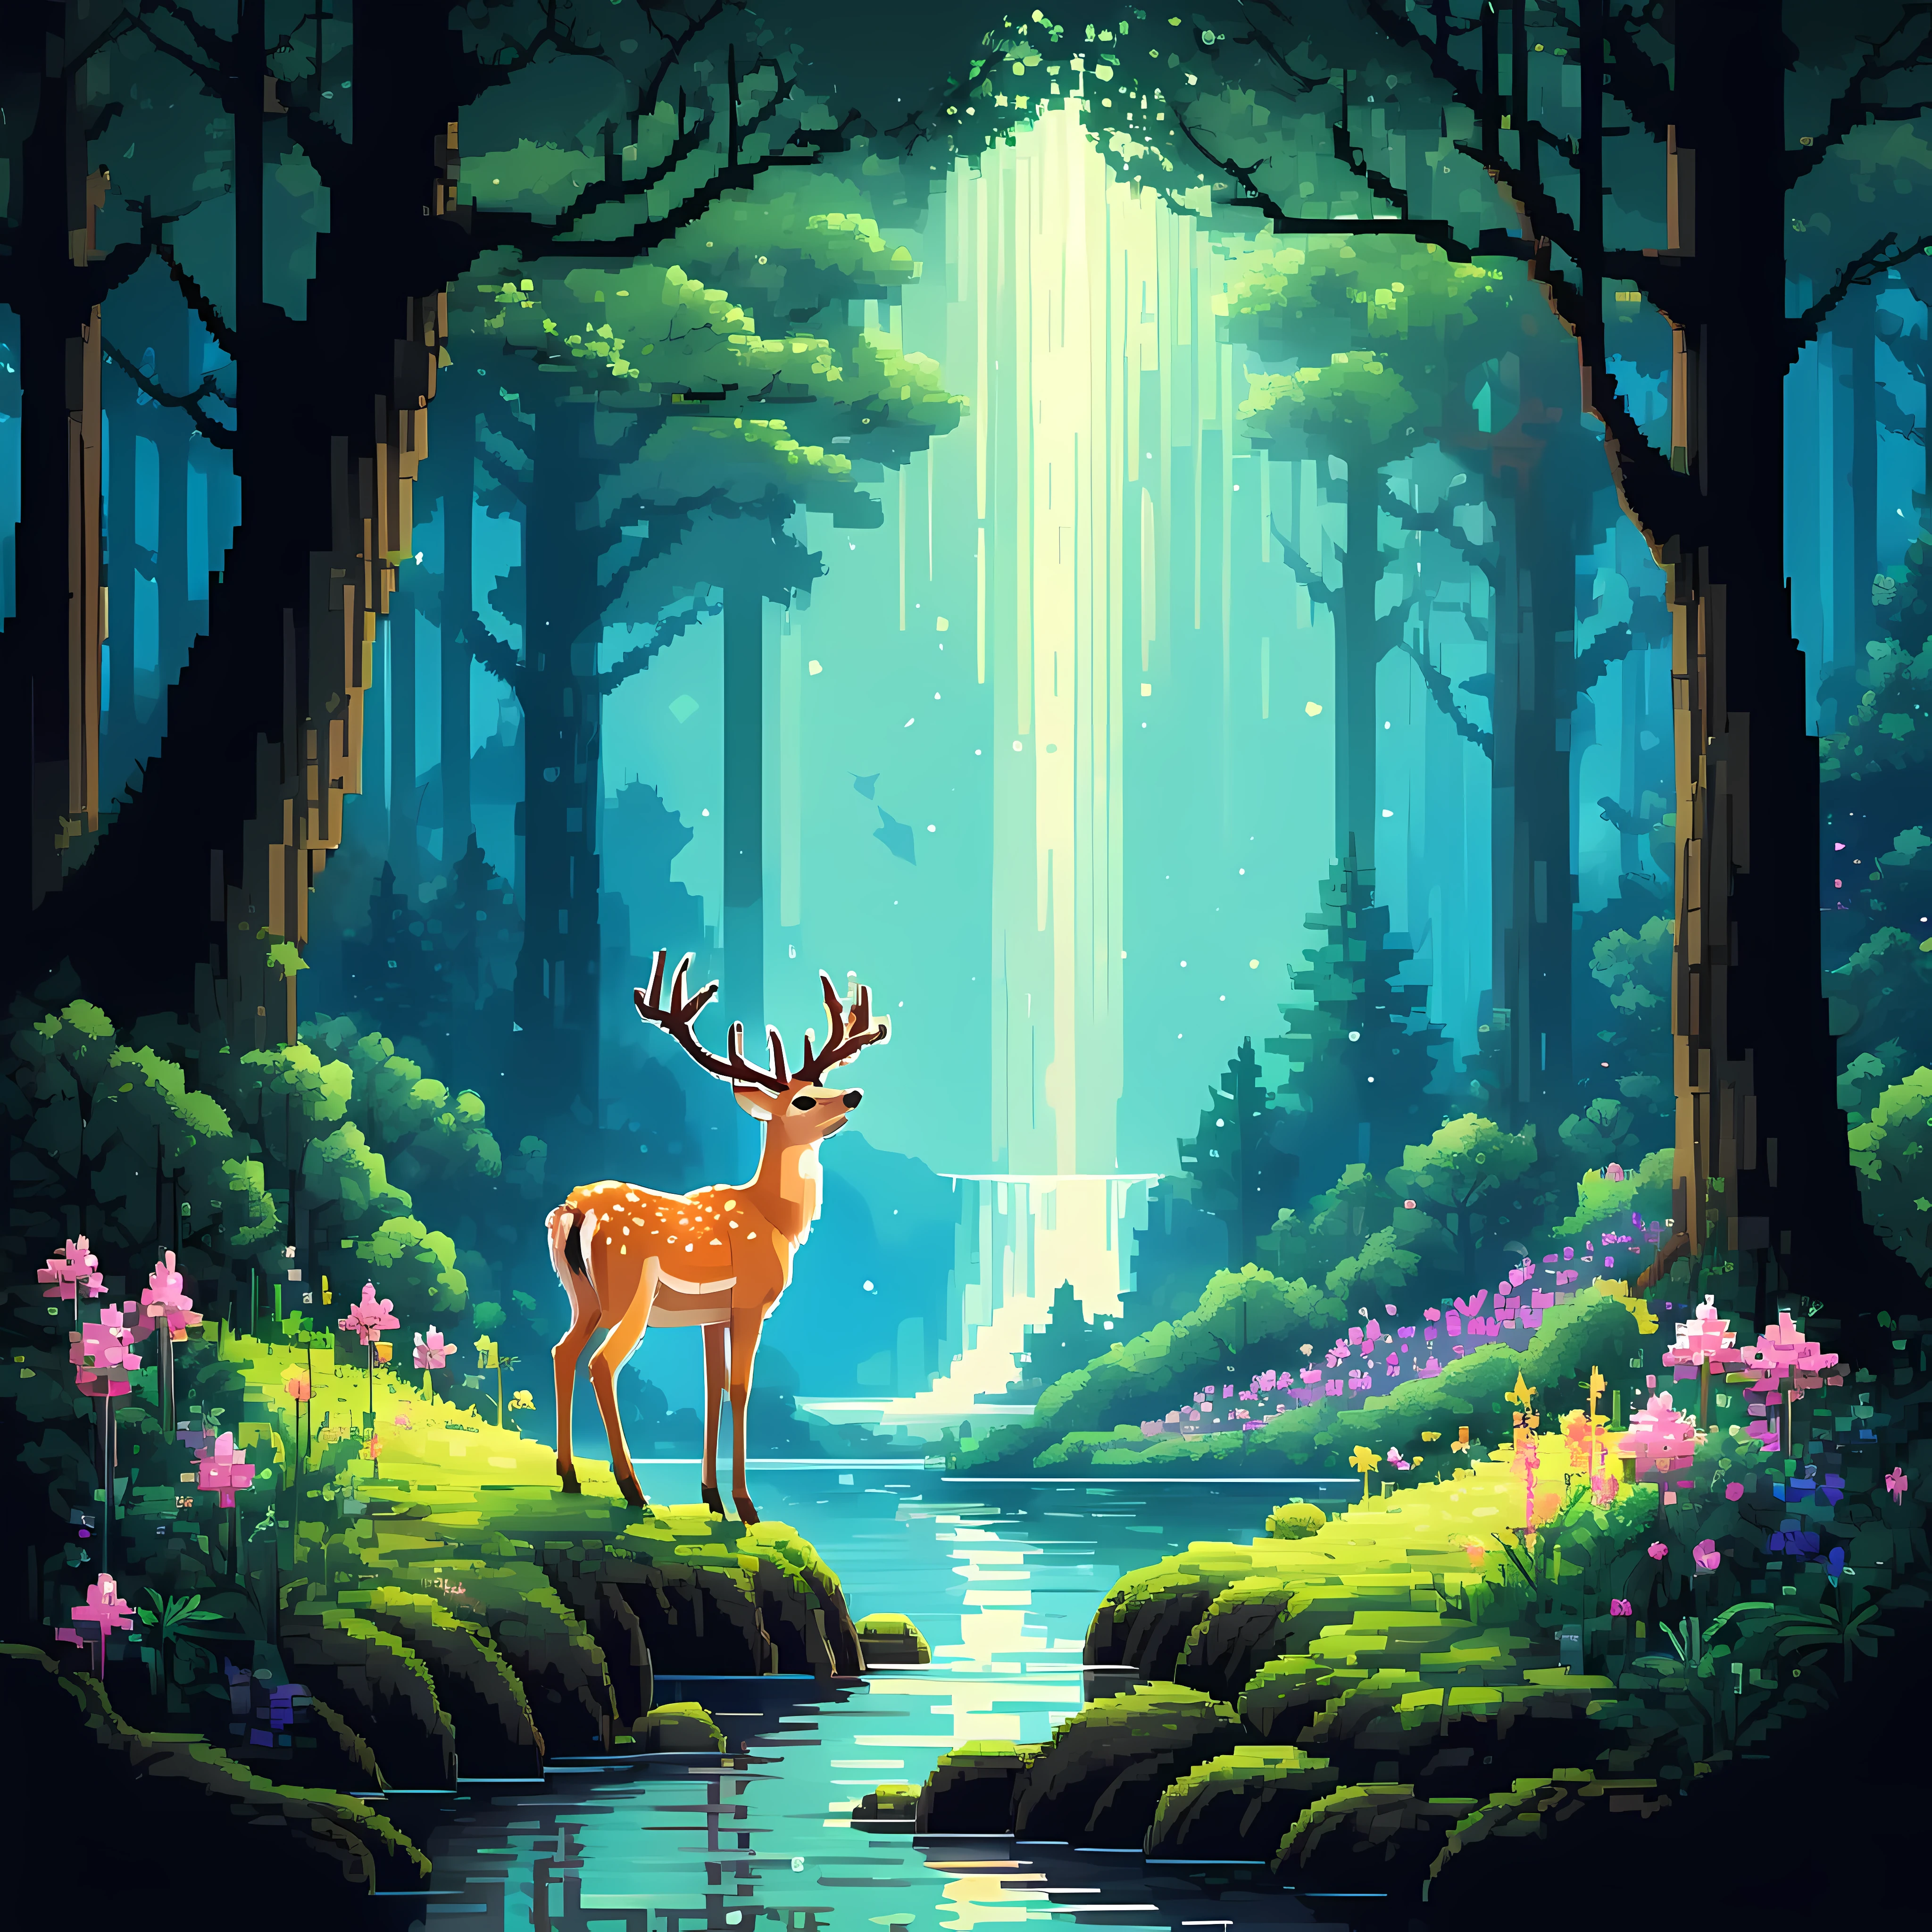 Cute pixel art illustration, masterpiece in maximum 16K resolution, superb quality, imagine an enchanting forest under a starlit sky, where ancient trees stand tall with twisted branches reaching towards the heavens, a majestic ((translucent deer)) moves gracefully through the moonlit shadows, soft moss covers the forest floor, dotted with delicate glowing flowers that emit a soft light, a gentle waterfall nearby. | ((More_Detail))